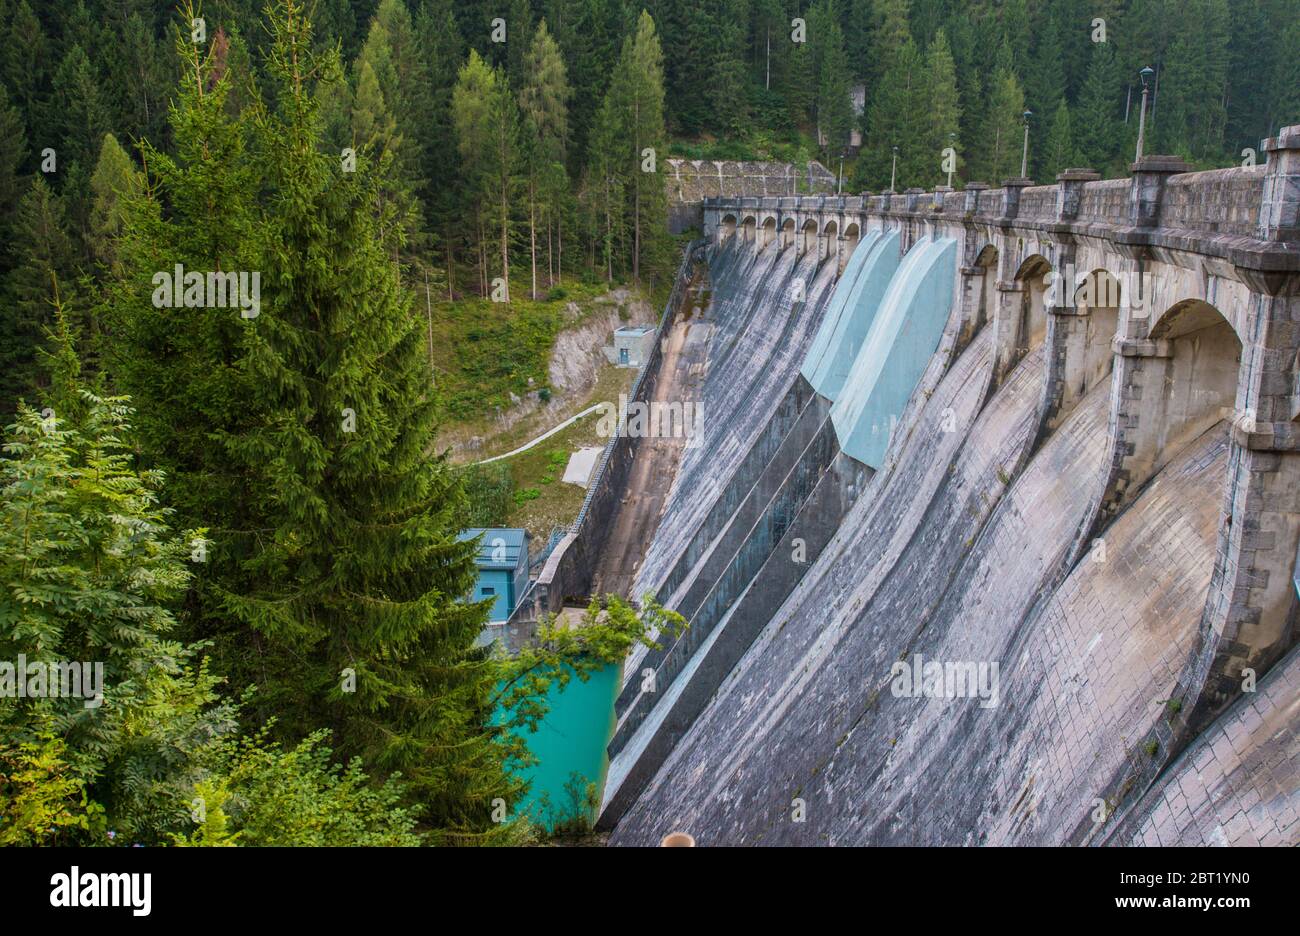 View Of Italian Auronzo Di Cadore Enormous Dam With Turquoise Water Below And Pine Trees Around. Stock Photo